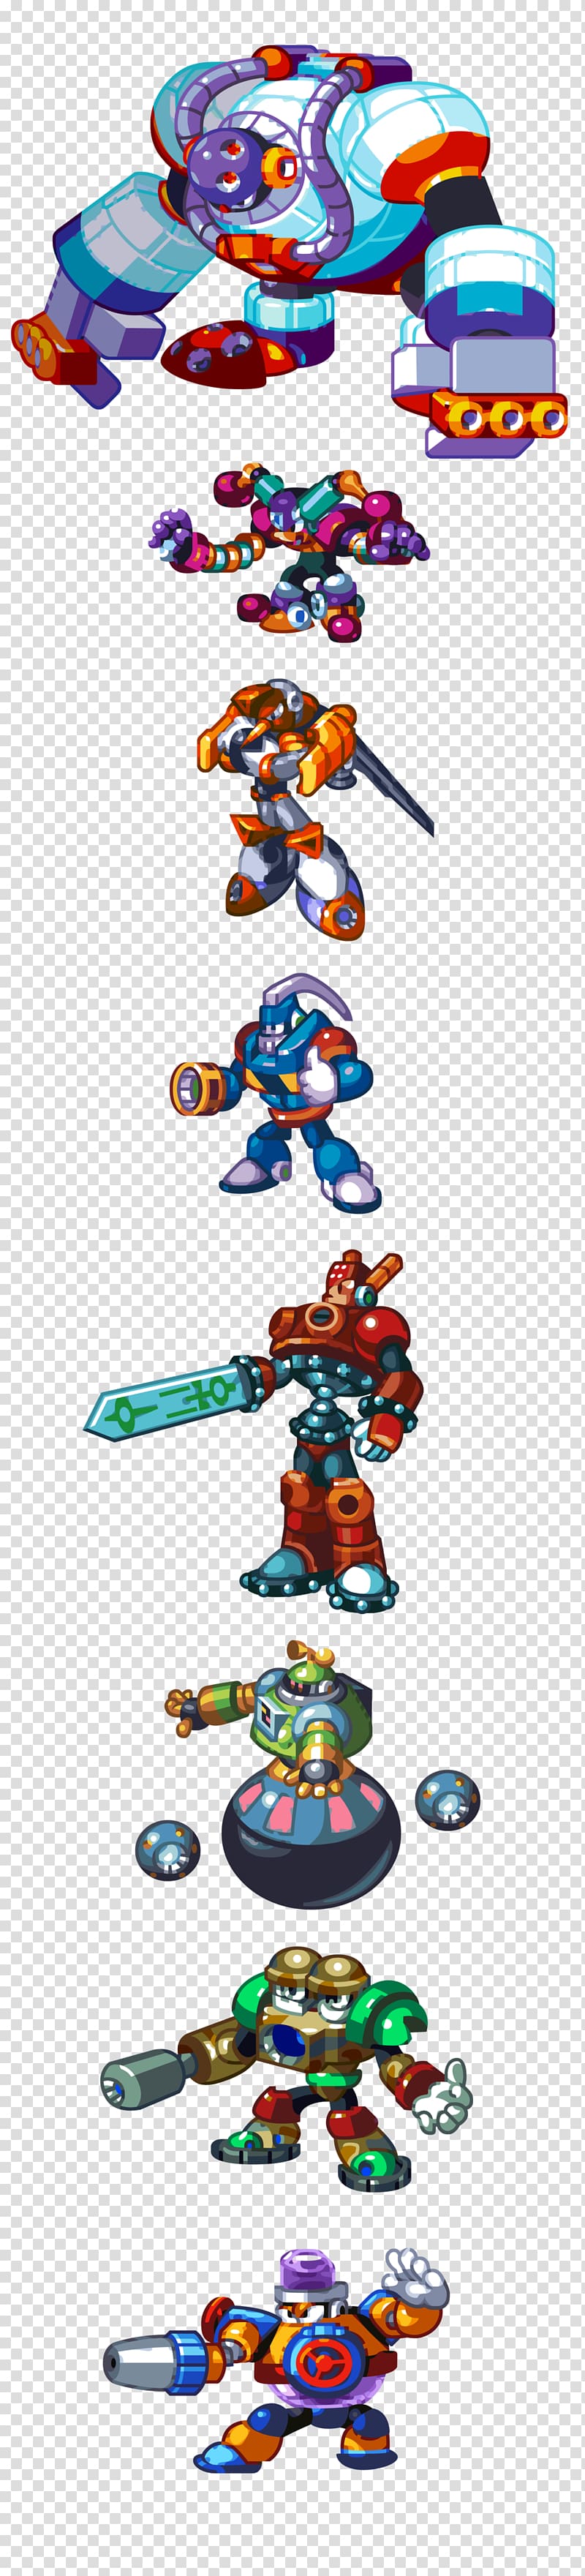 Mega Man 8 Mega Man 9 Mega Man 5 Mega Man 4, megaman transparent background PNG clipart